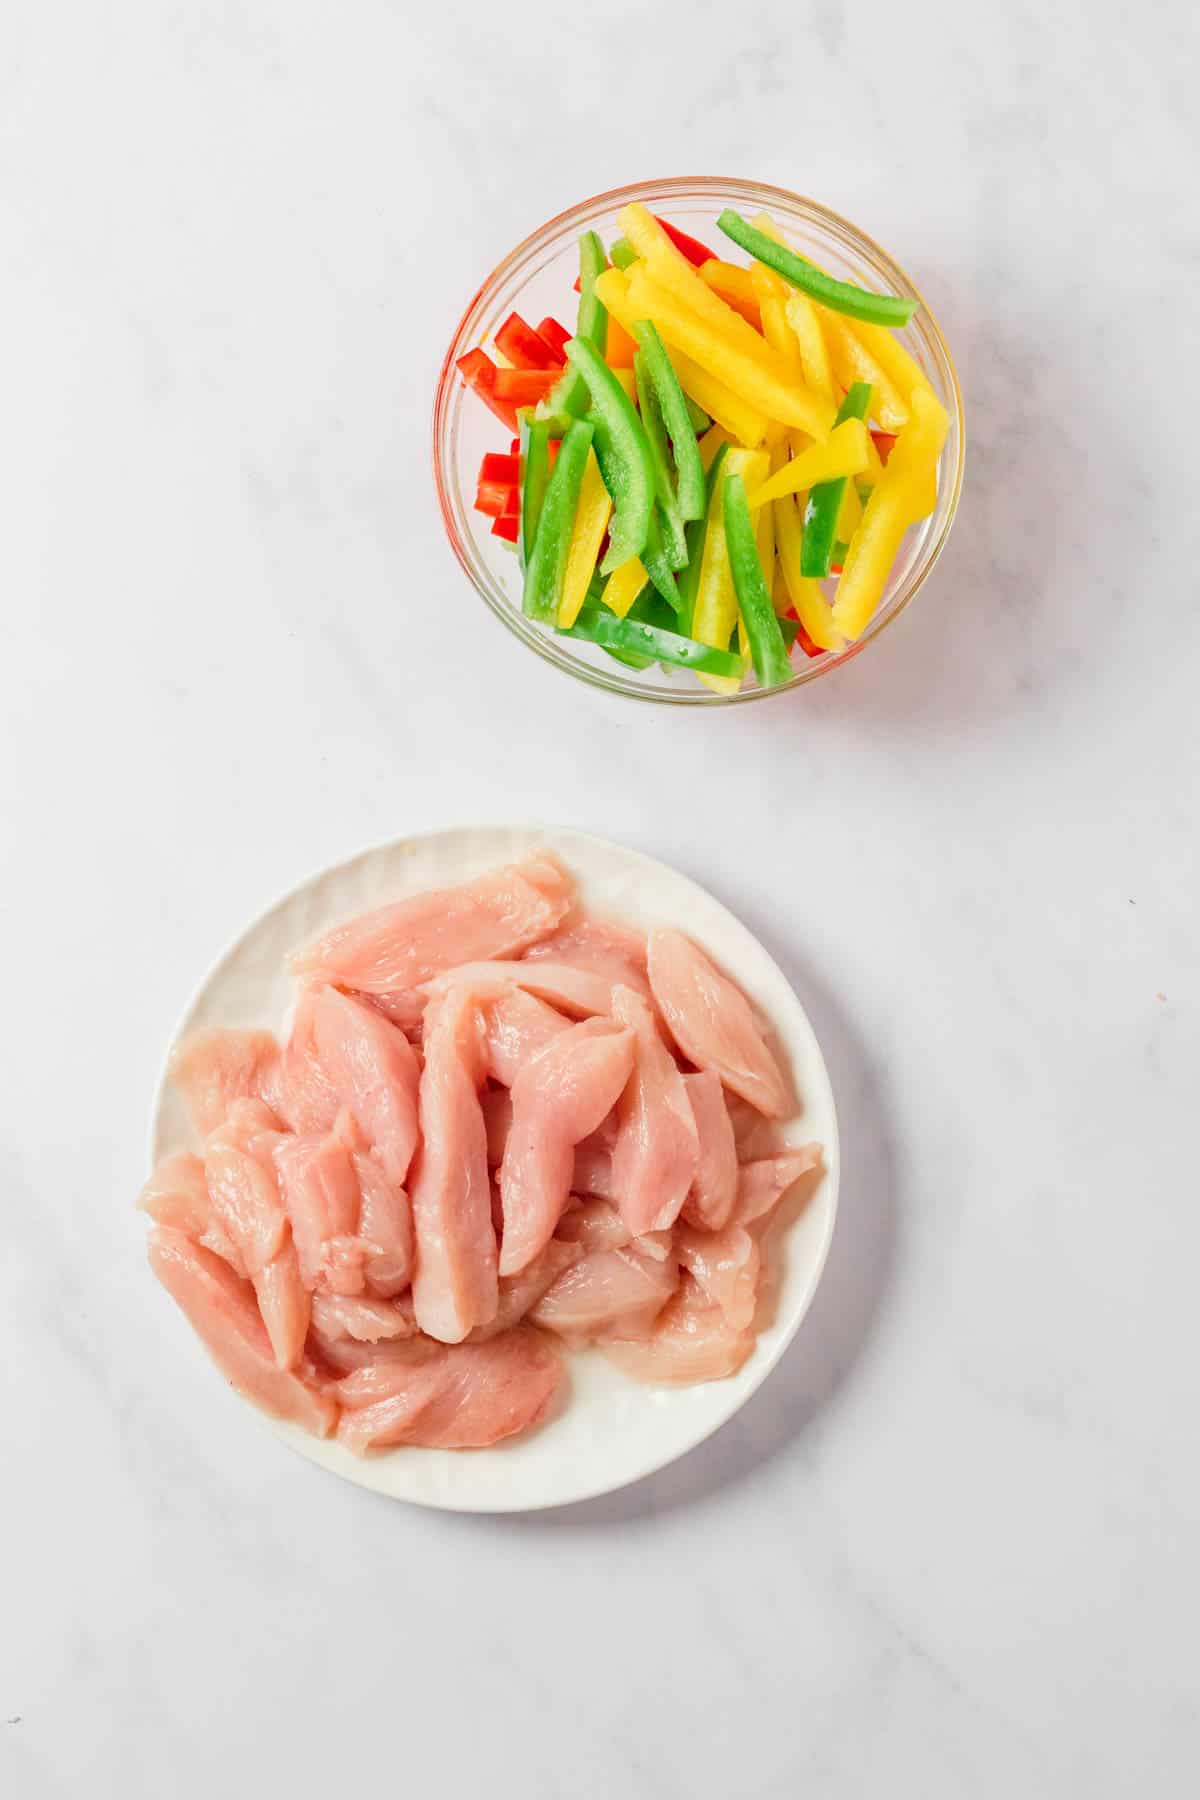 Sliced chicken breast and red, yellow, and green bell peppers.